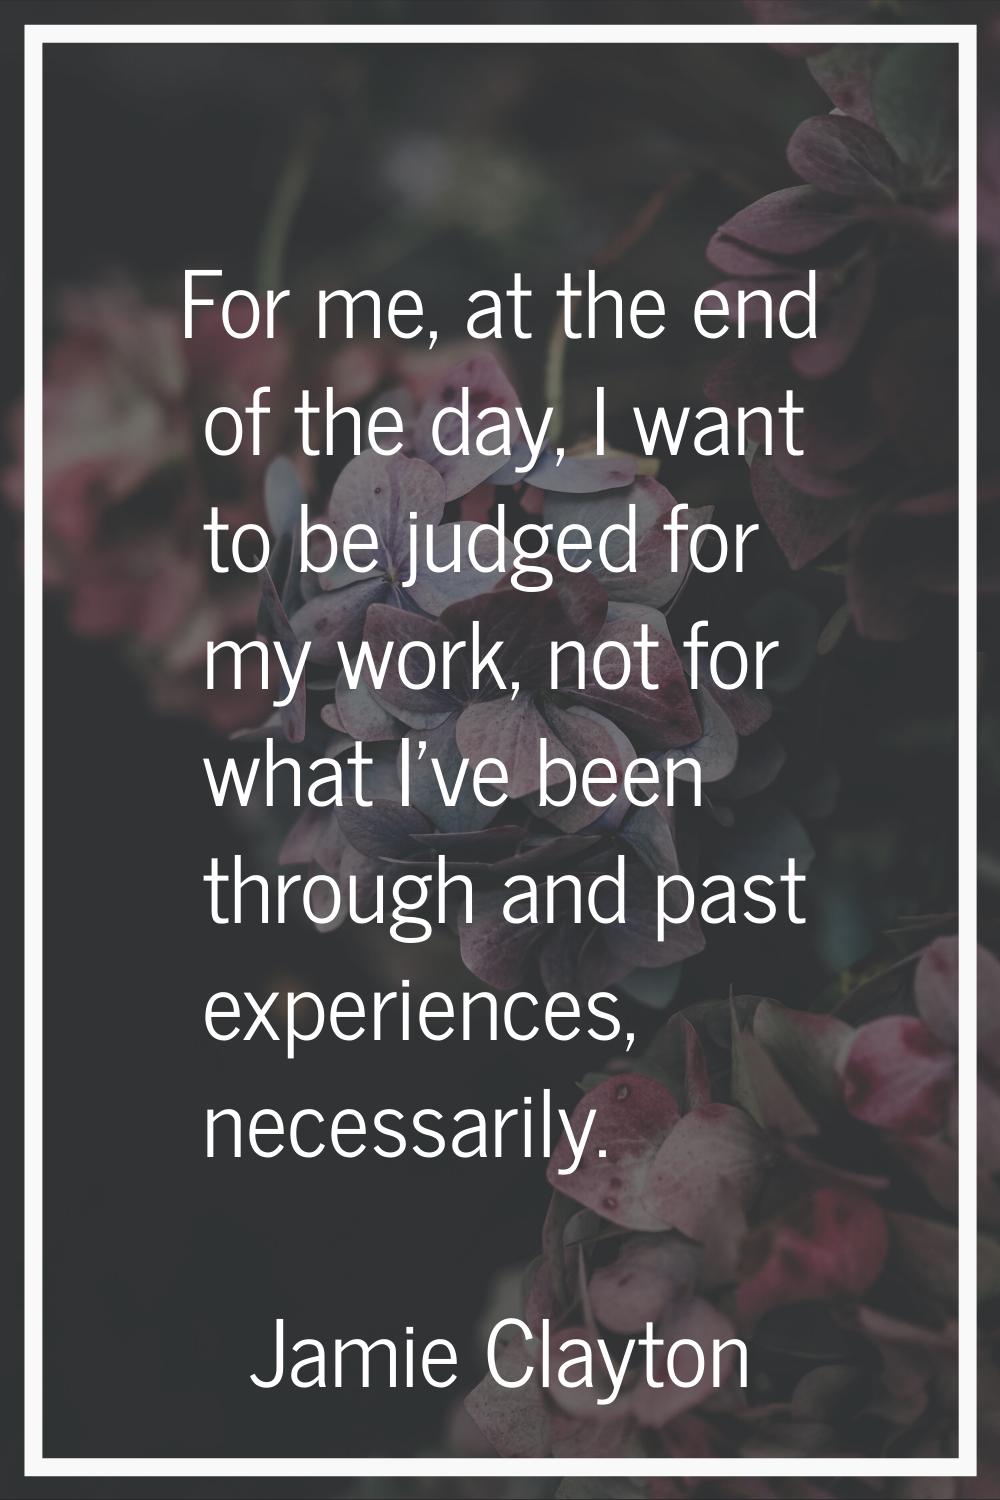 For me, at the end of the day, I want to be judged for my work, not for what I've been through and 